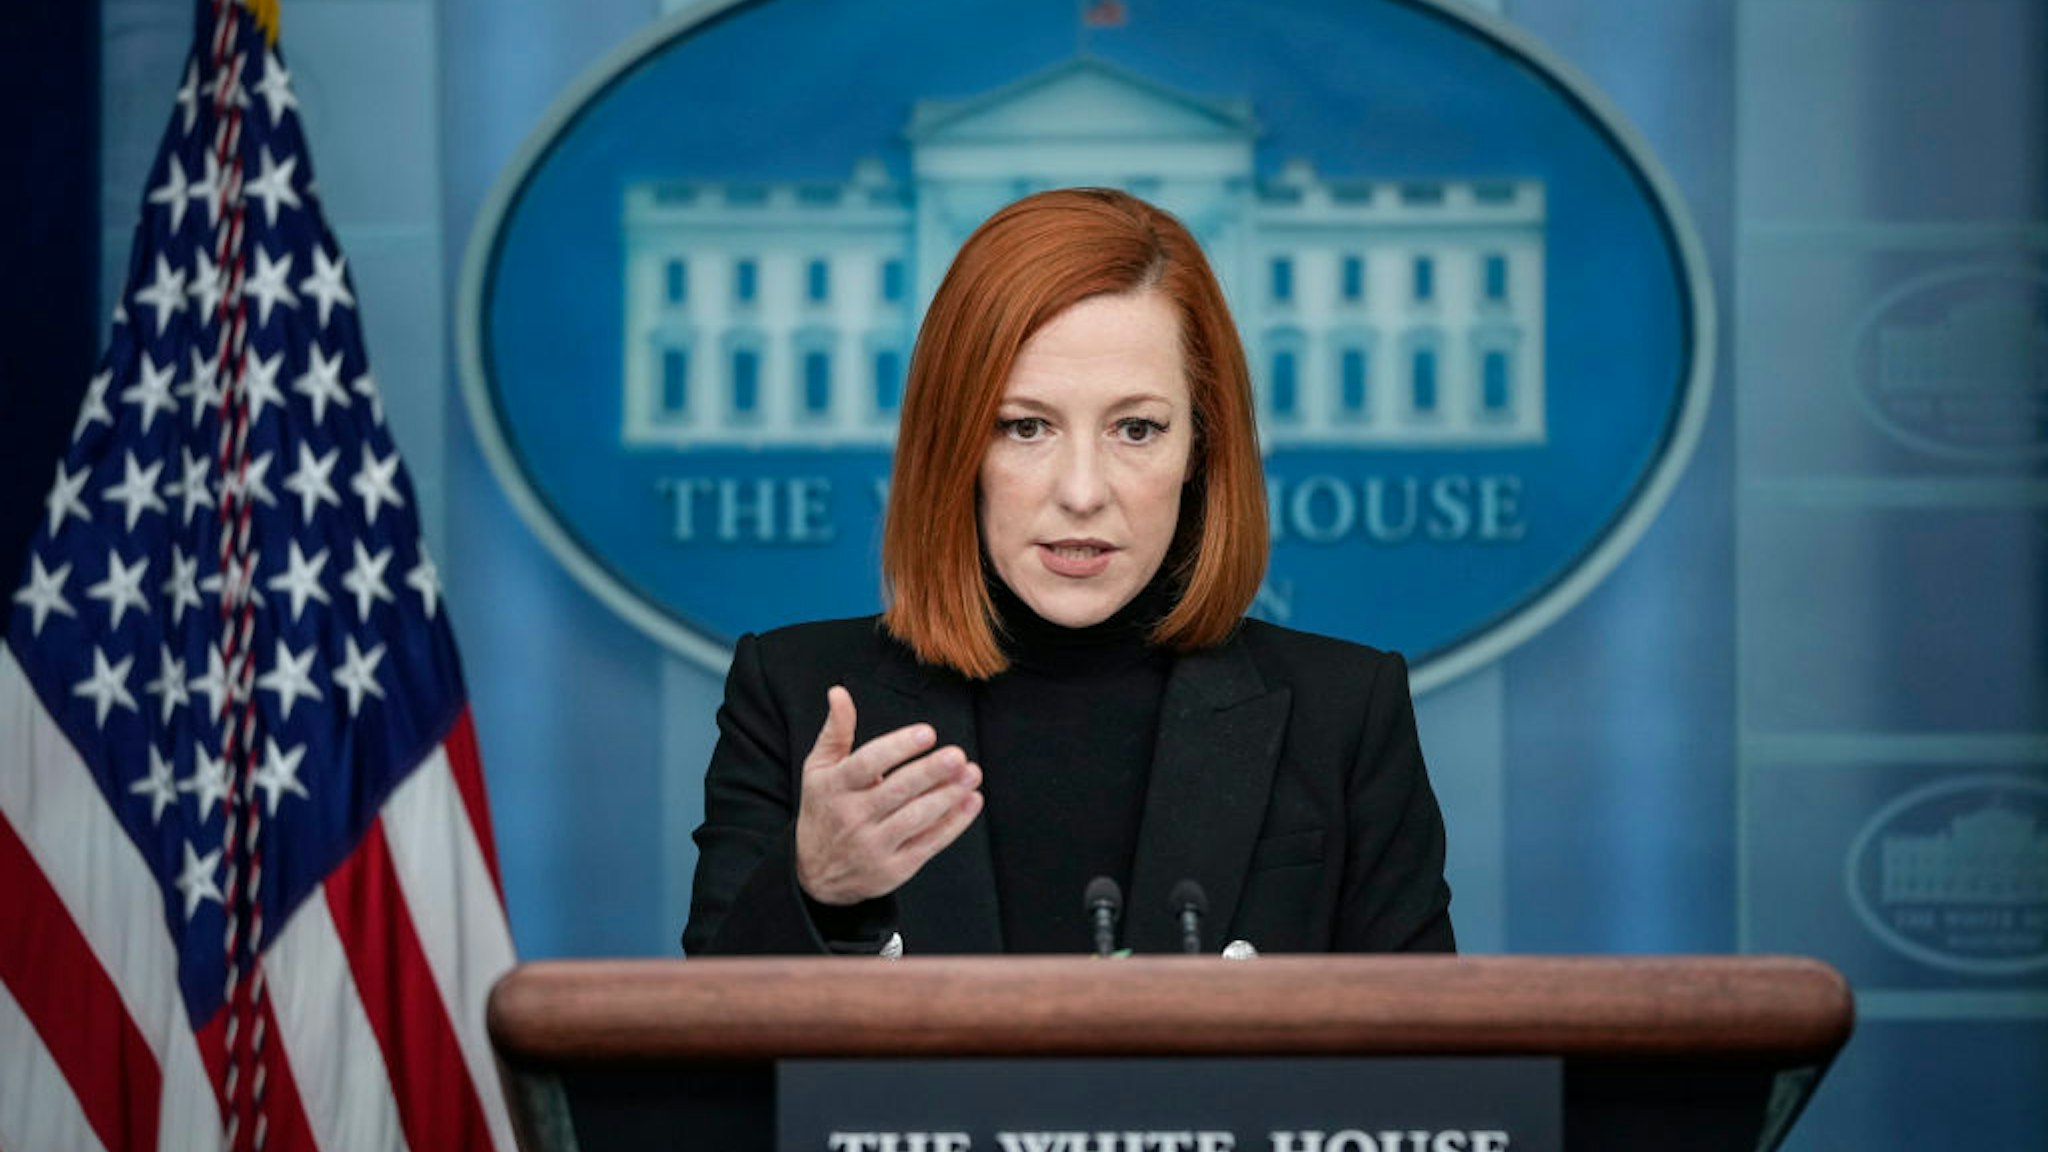 WASHINGTON, DC - FEBRUARY 25: White House Press Secretary Jen Psaki speaks during the daily press briefing in the White House February 25, 2022. Earlier in the day, President Joe Biden announced he will nominate Ketanji Brown Jackson, circuit judge on the U.S. Court of Appeals for the District of Columbia Circuit, to replace retiring Associate Justice Stephen Breyer. (Photo by Drew Angerer/Getty Images)